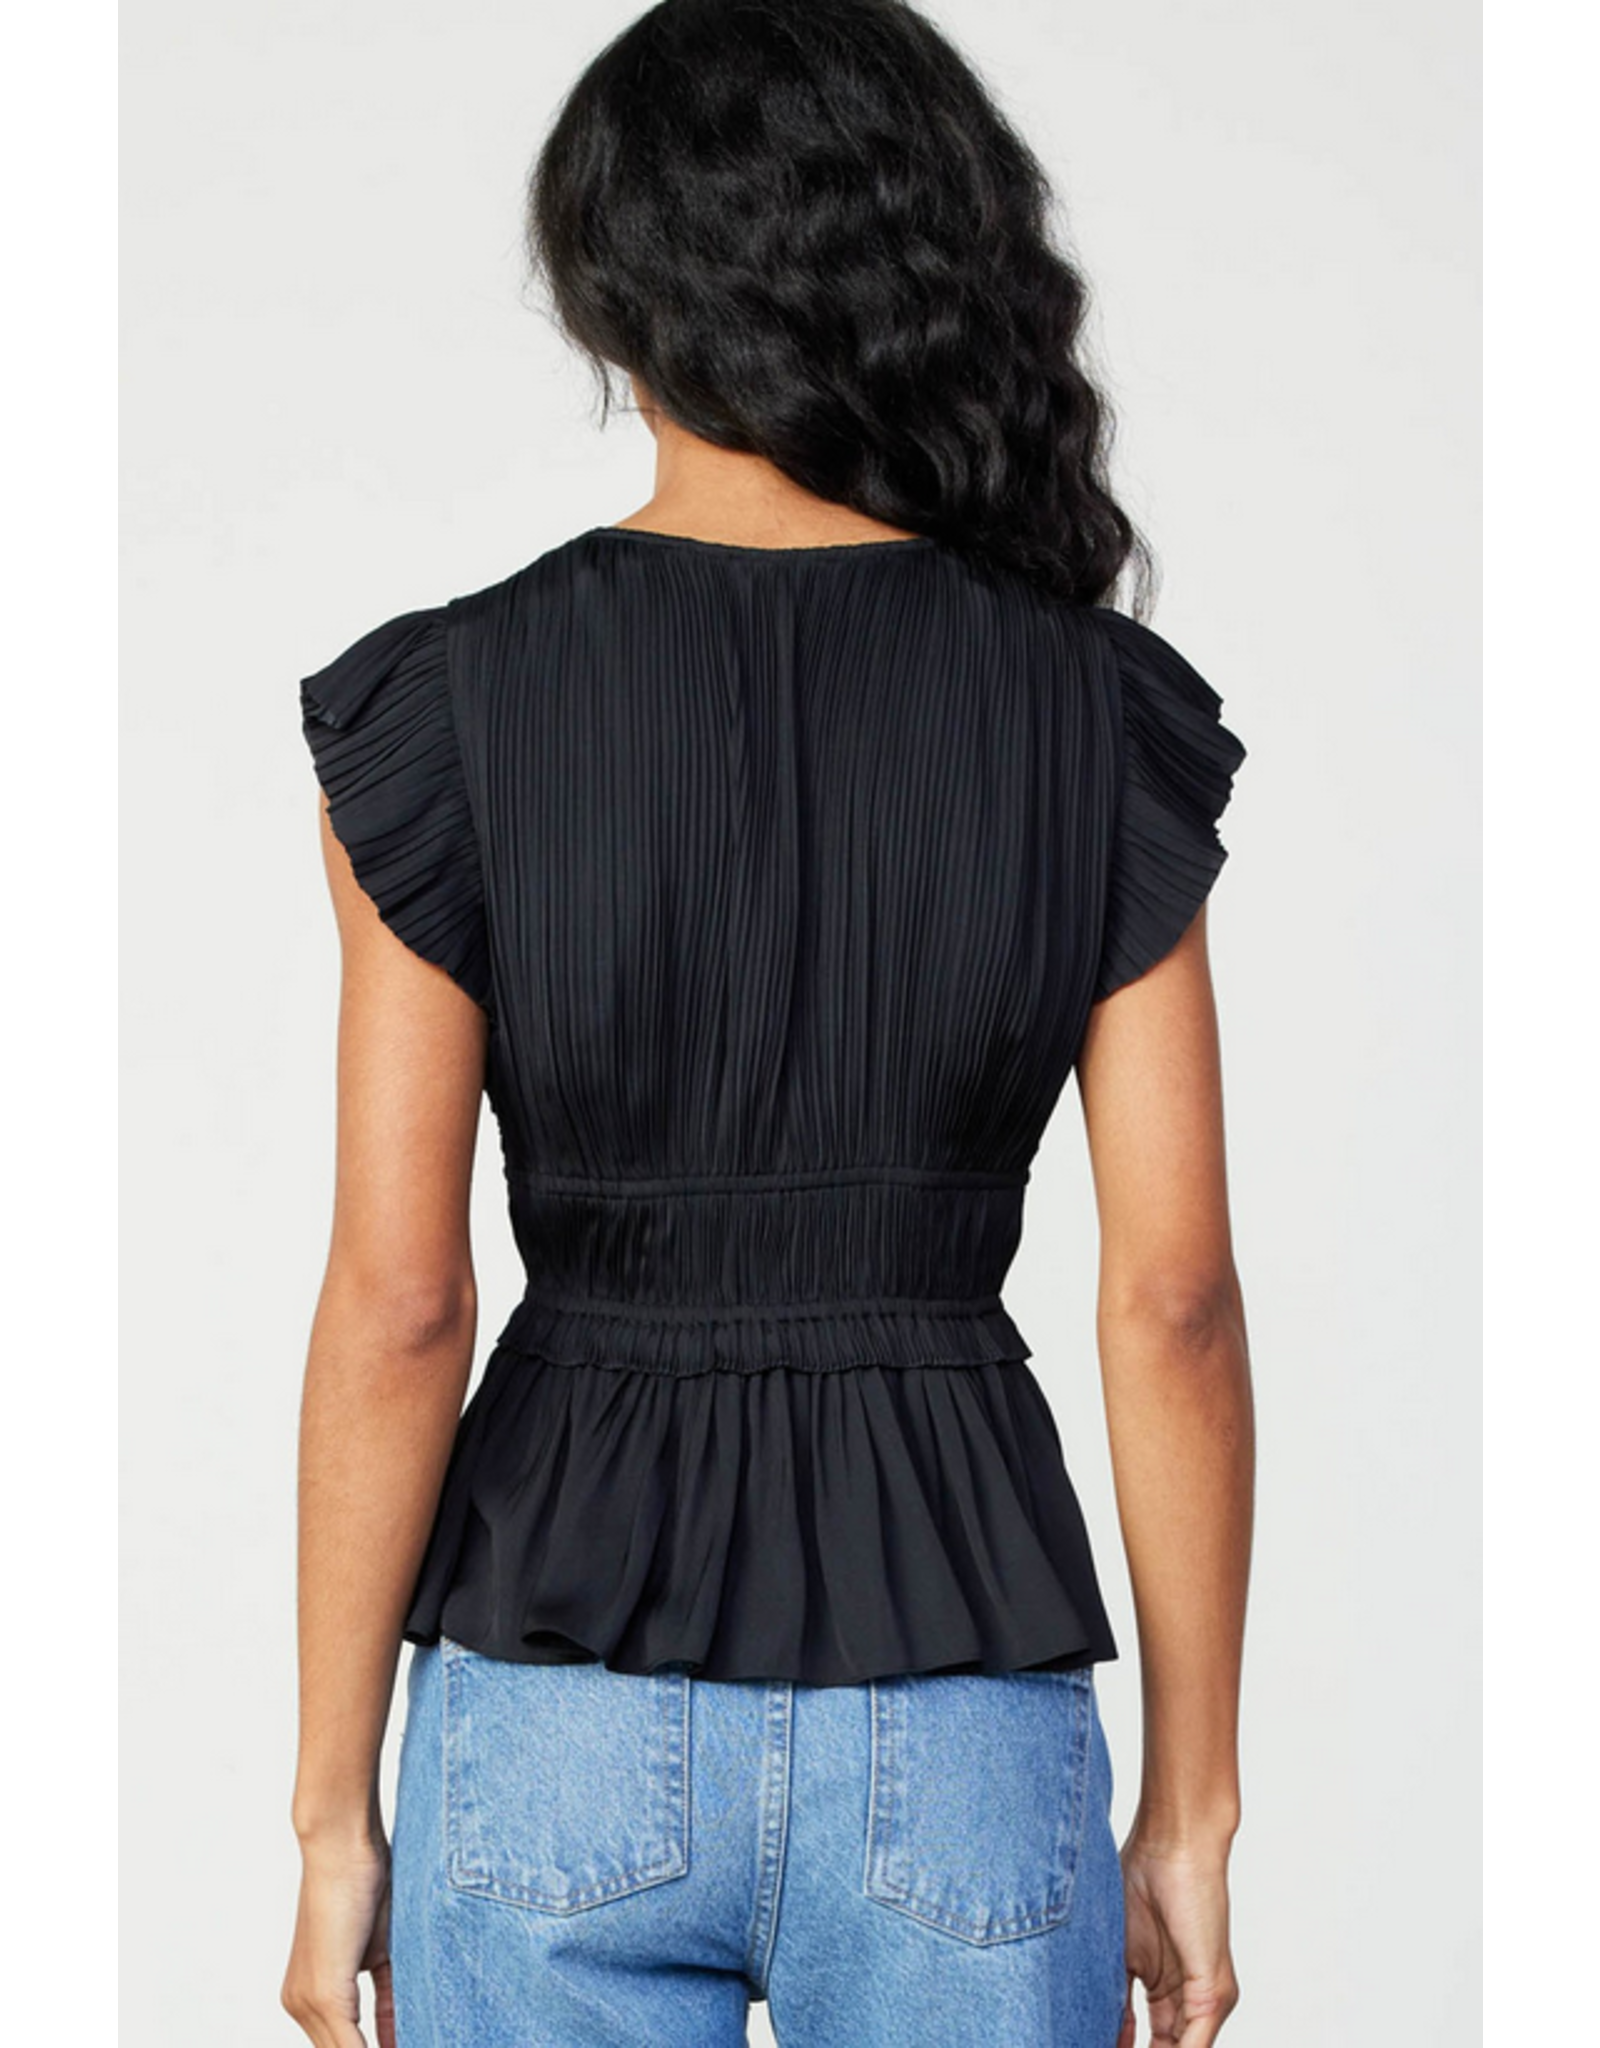 Current Air Pleated Peplum Blouse